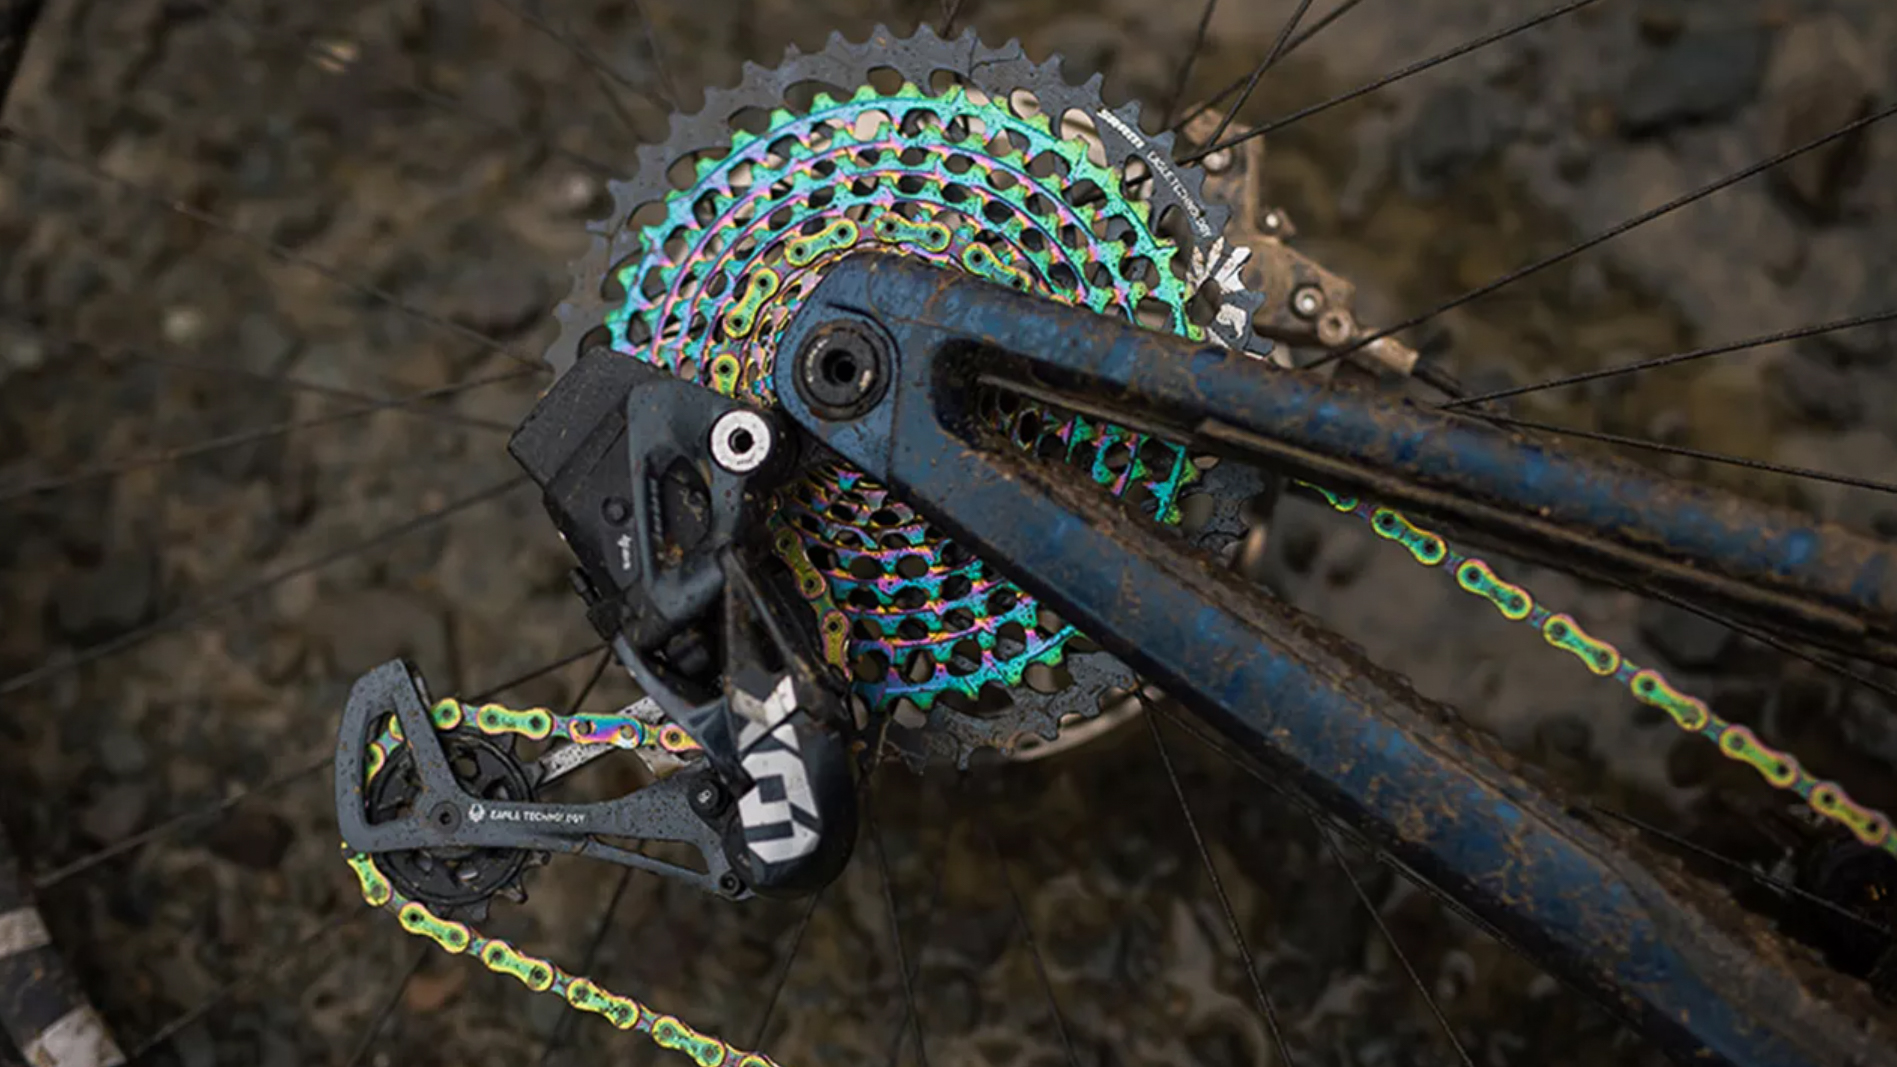 SRAM UDH explained everything you need to know about the Universal